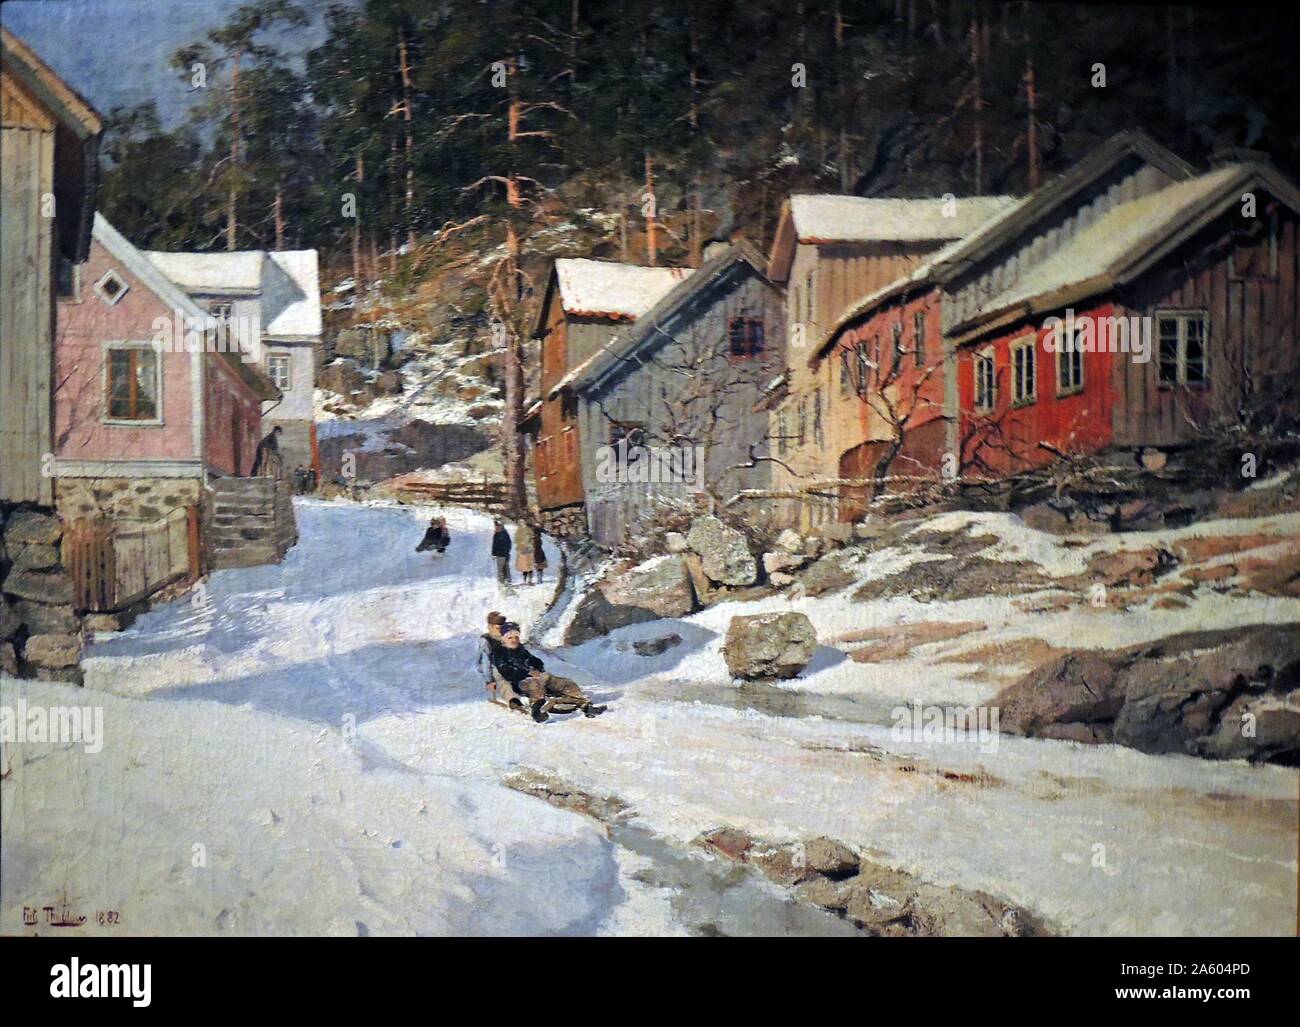 Street in Kragero, 1882 by FritsThaulow (1847-1906). Oil on canvas. Stock Photo